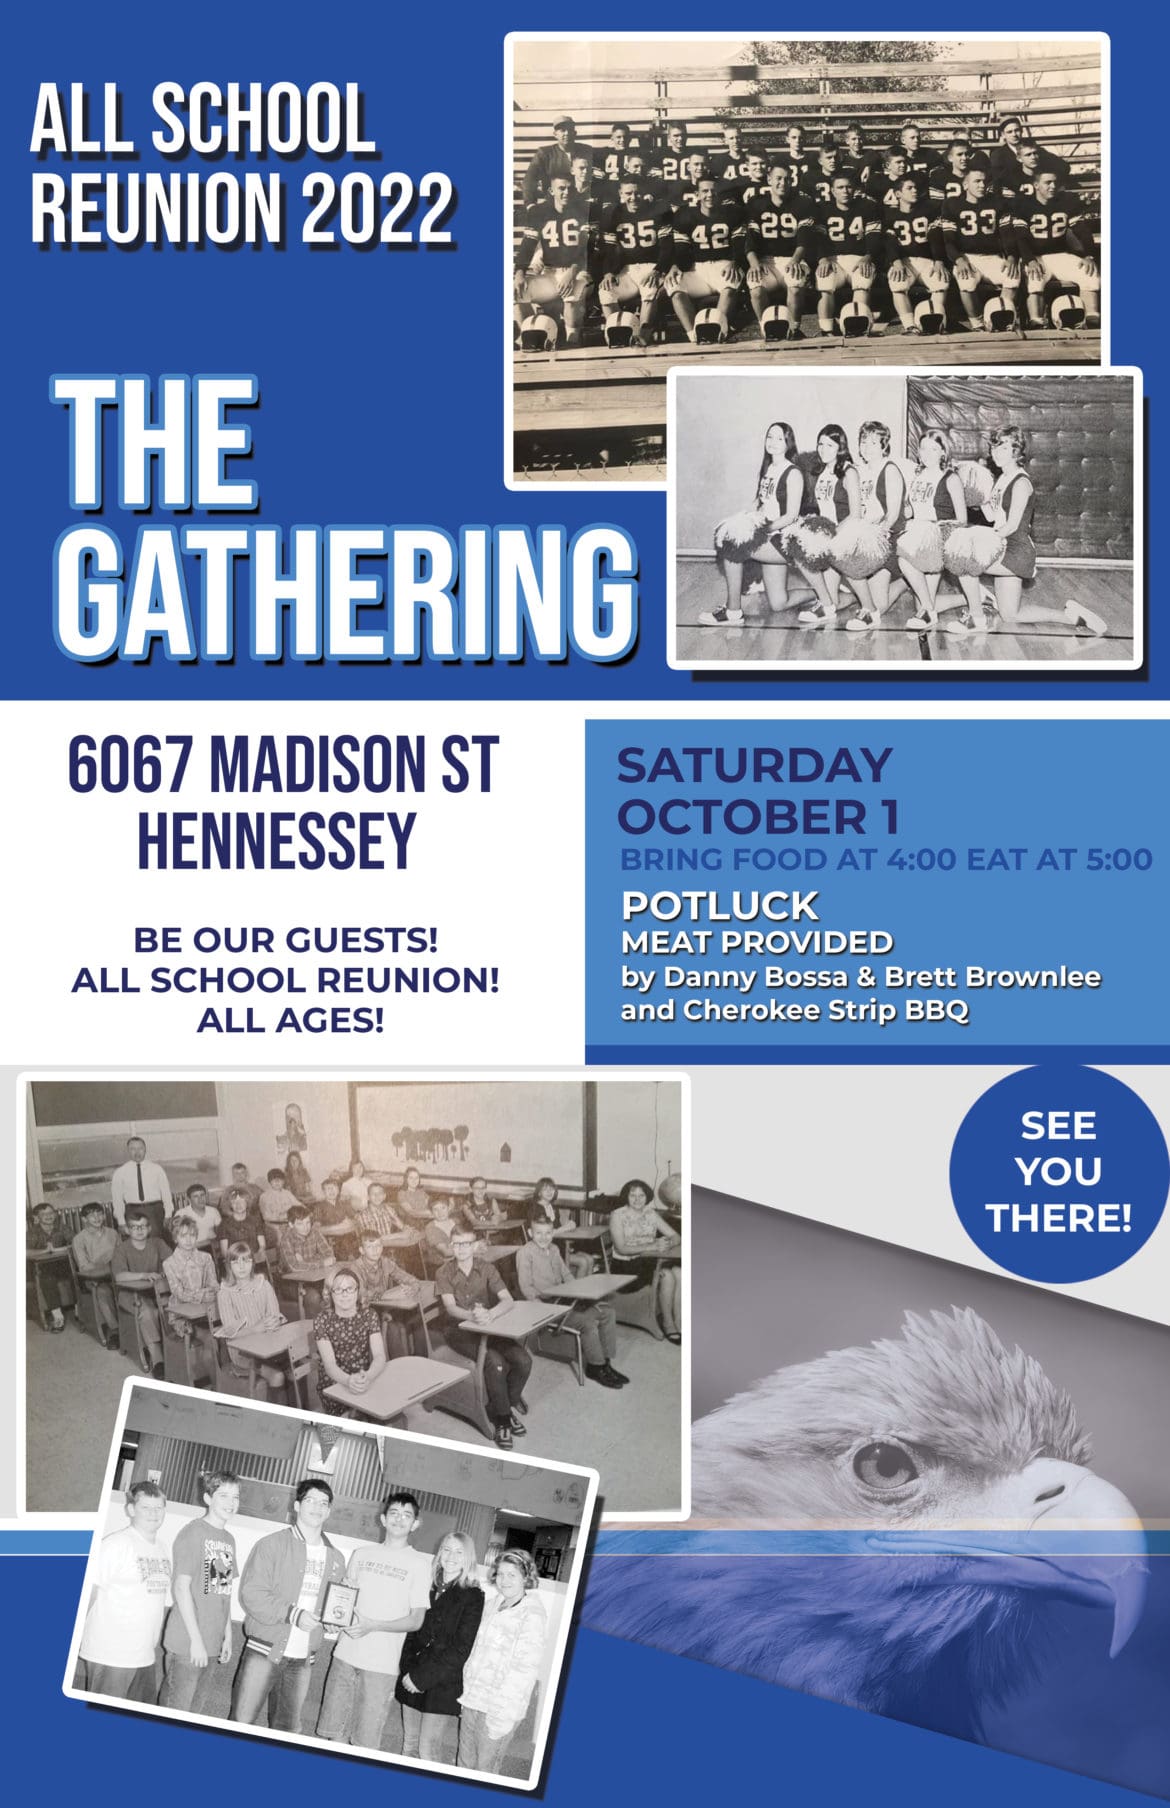 THE GATHERING all school reunion October 1